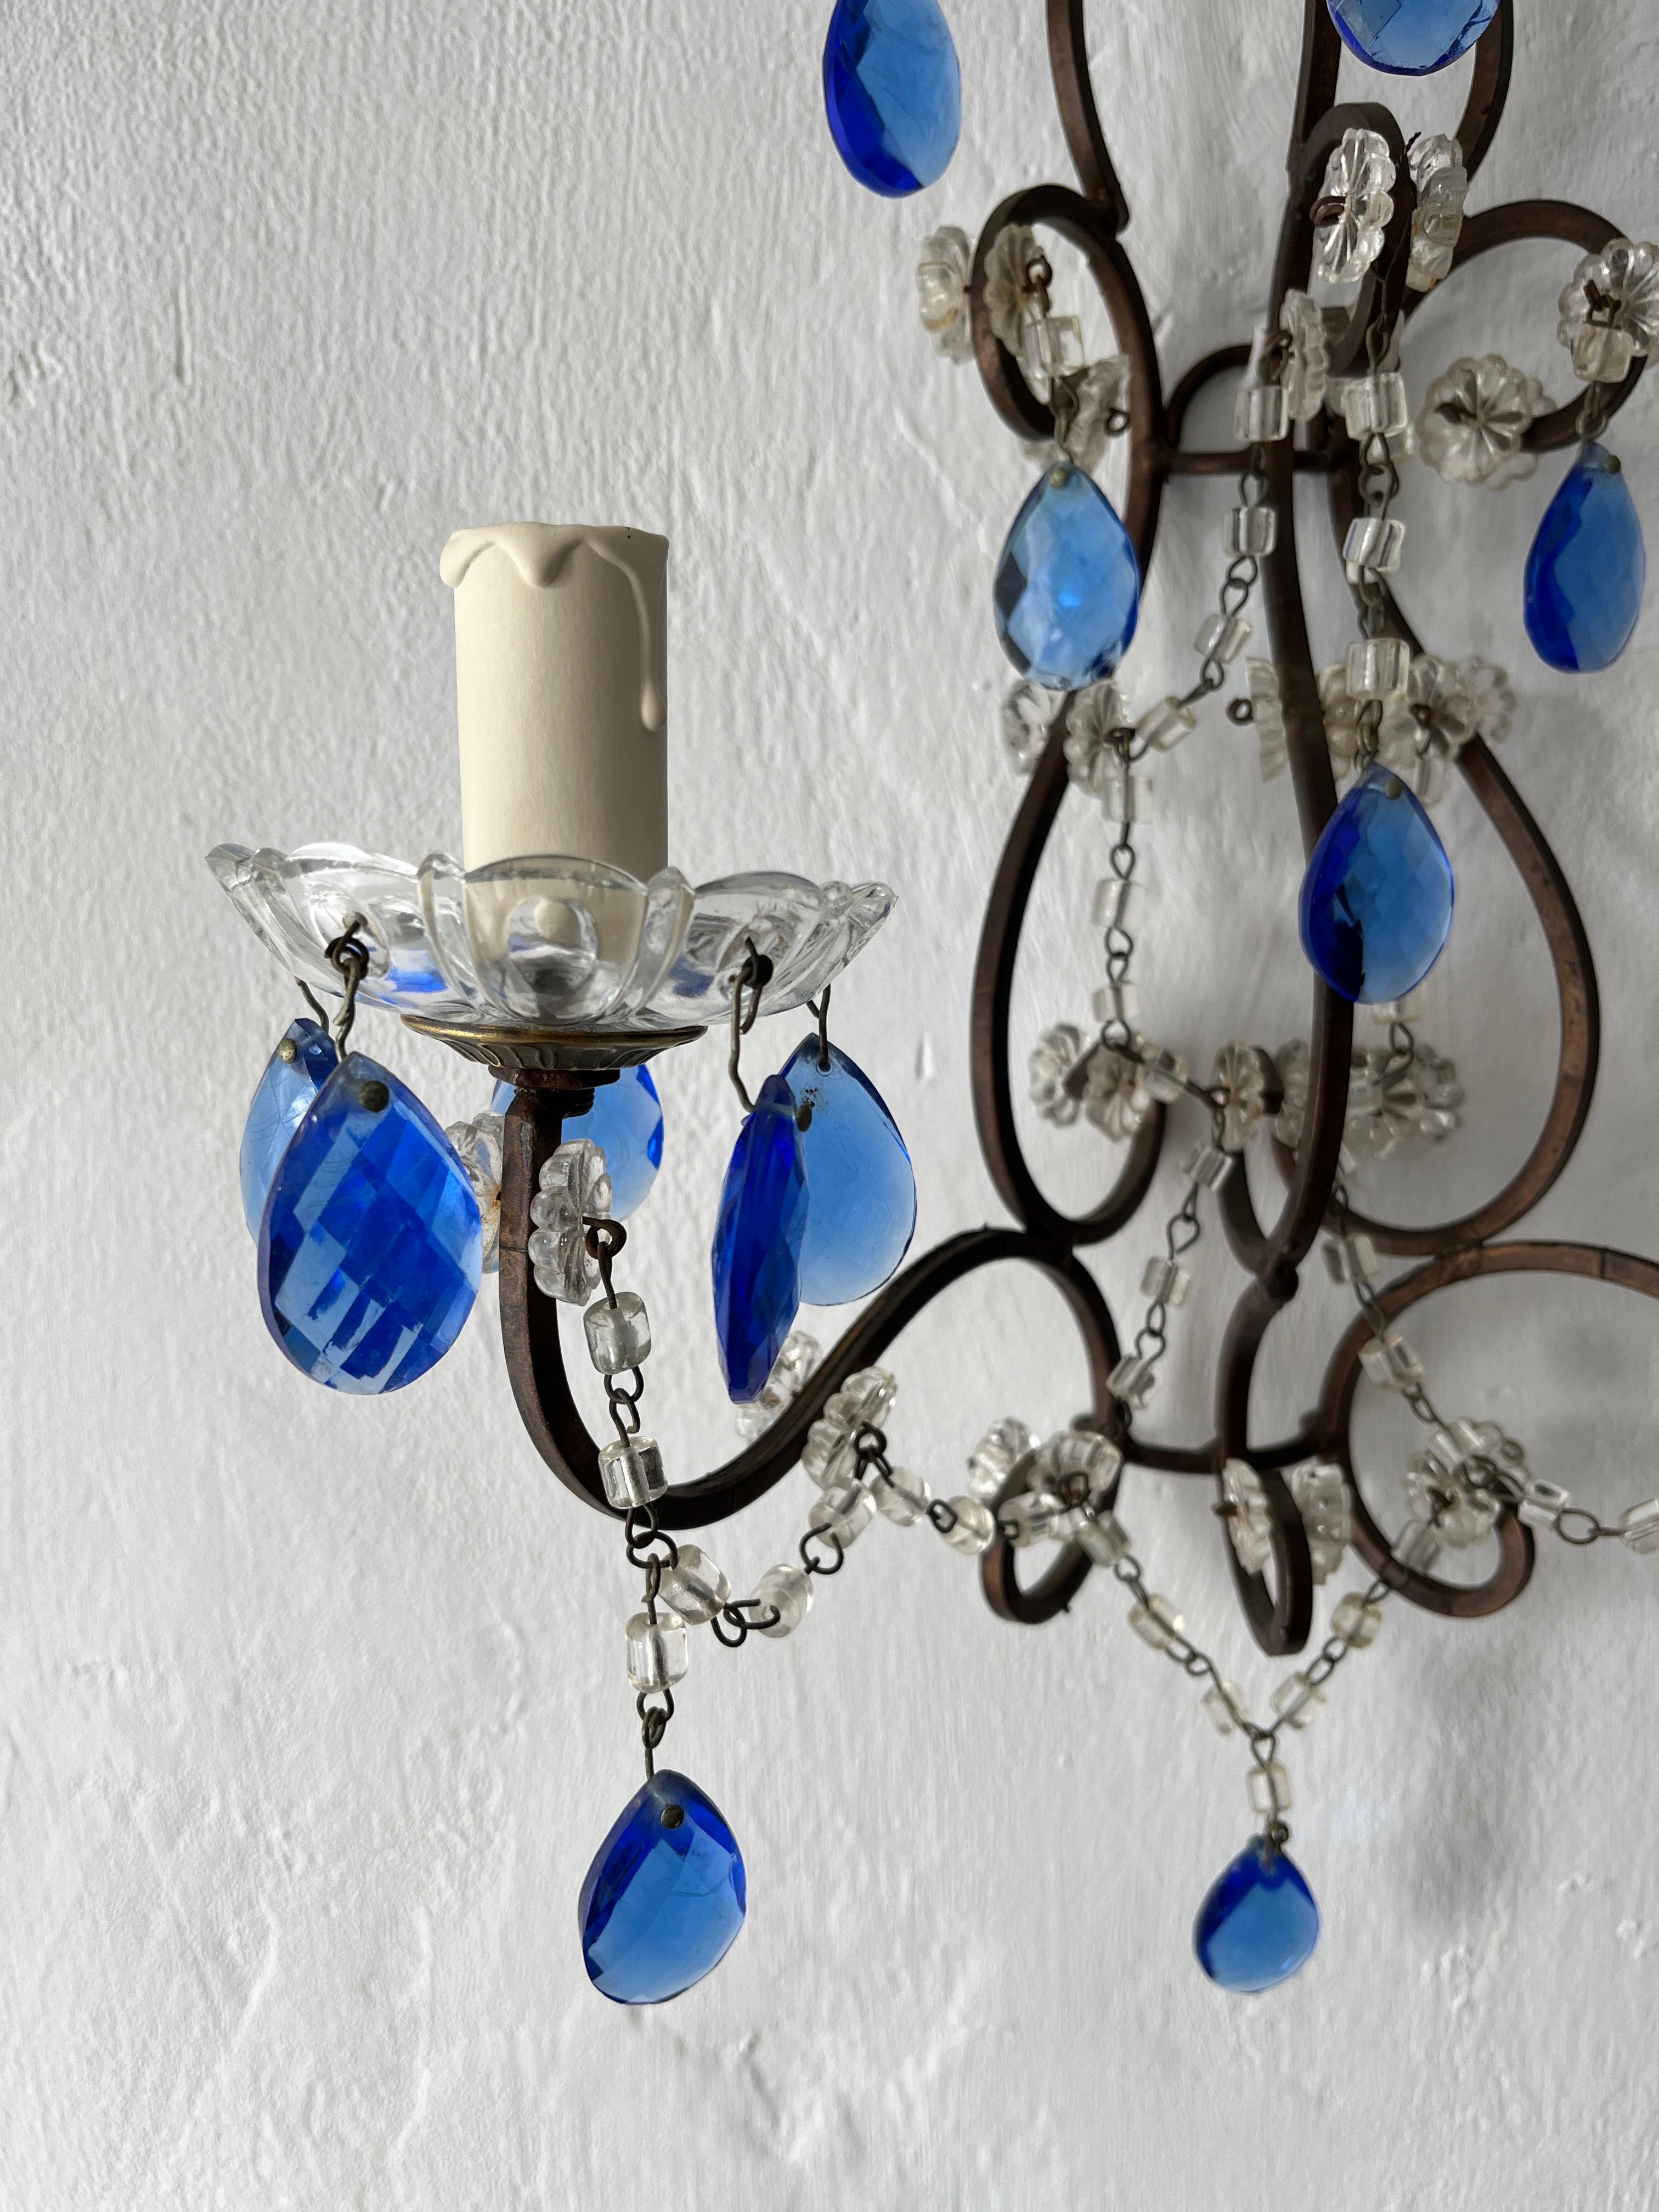 Crystal Beautiful French Cobalt Blue Prisms Macaroni Bead Swags Sconces c1920 For Sale